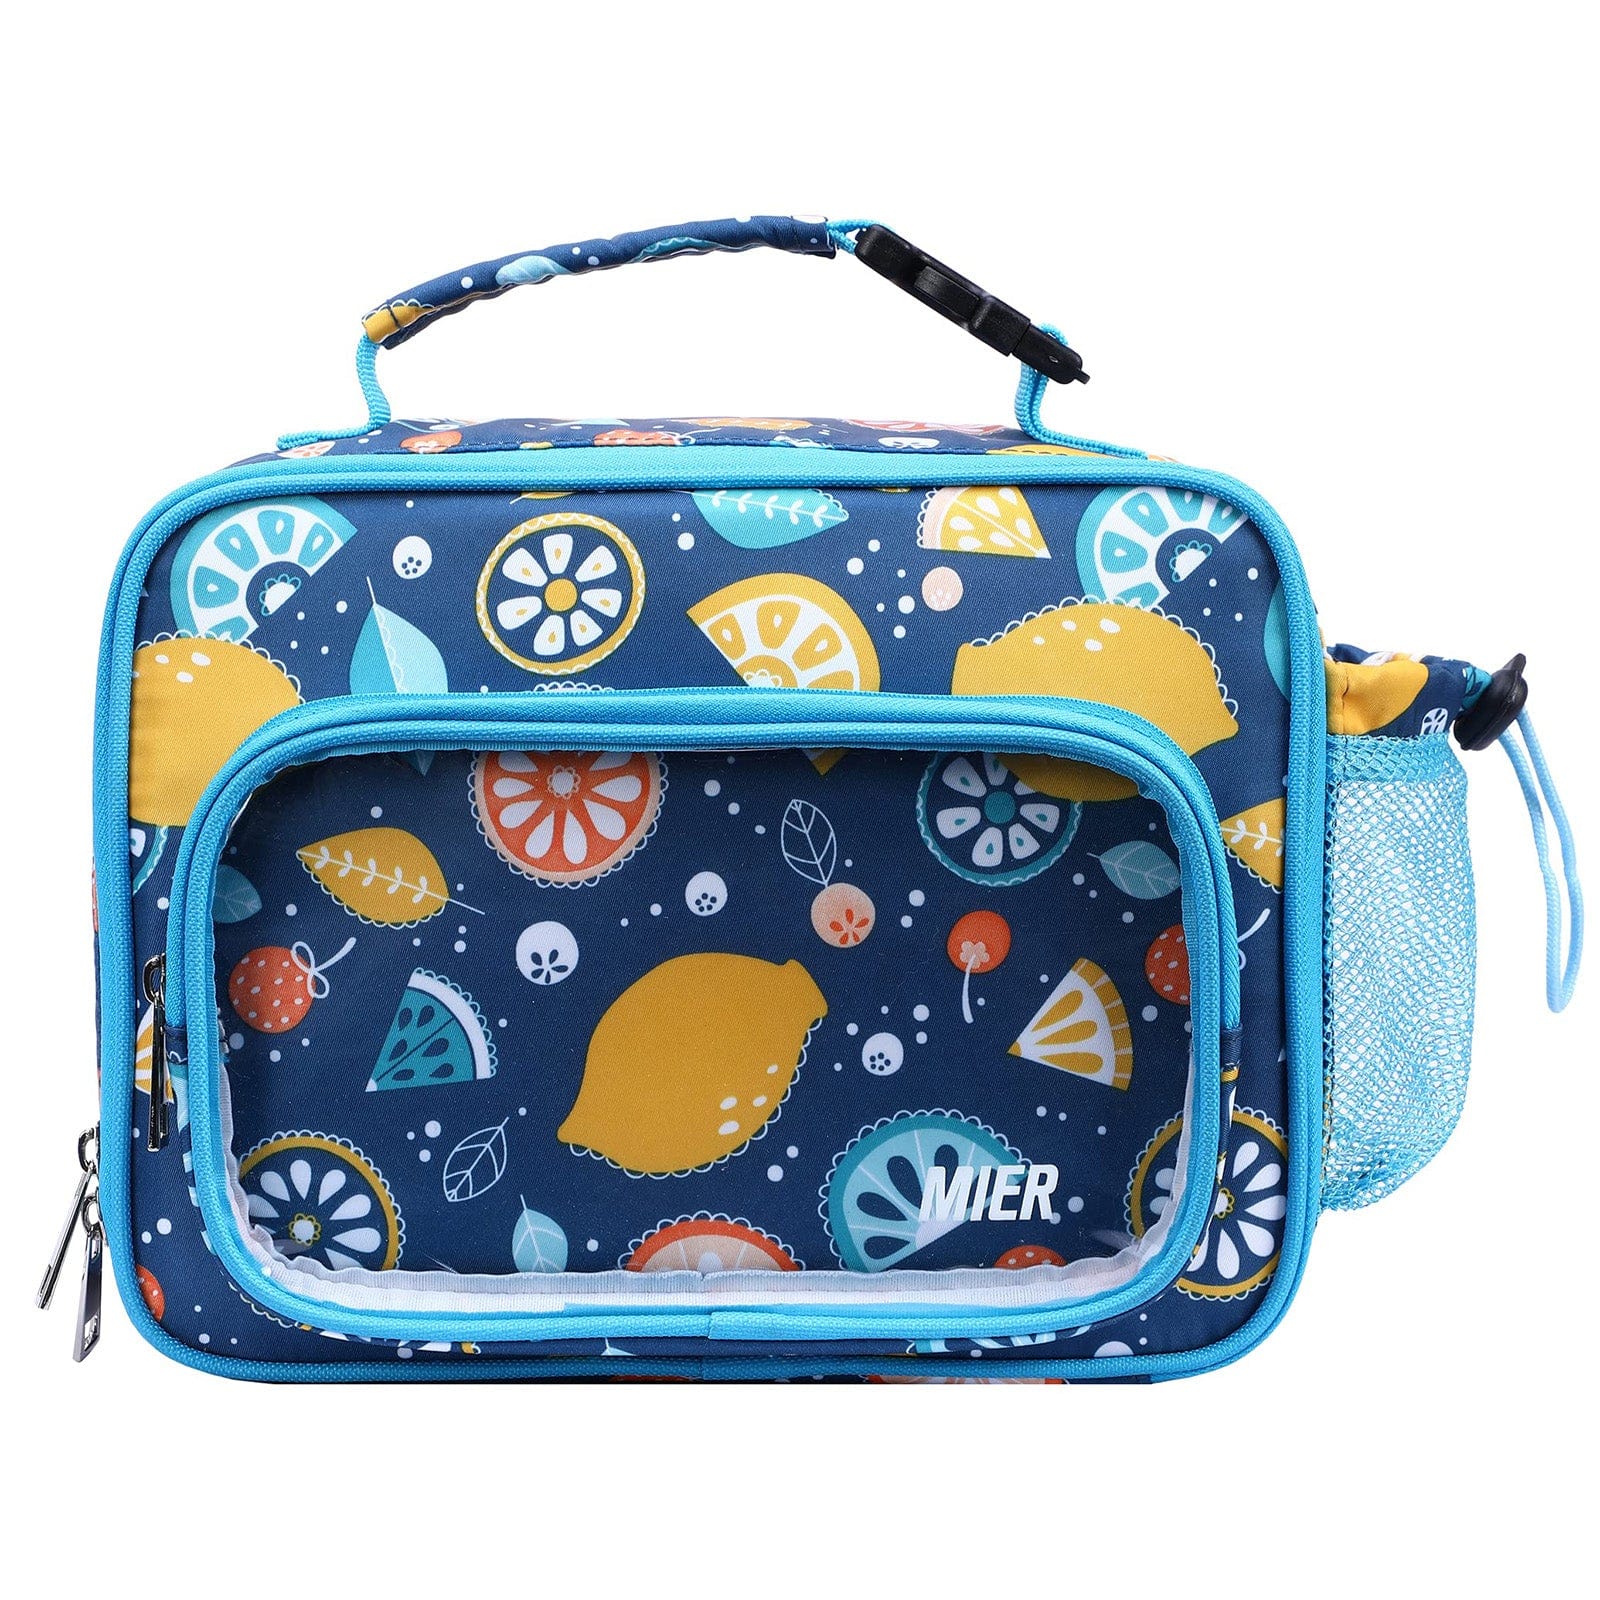 MIER Small Lunch Bag Tote for Kids with Shoulder Strap, Blue Dinosaur